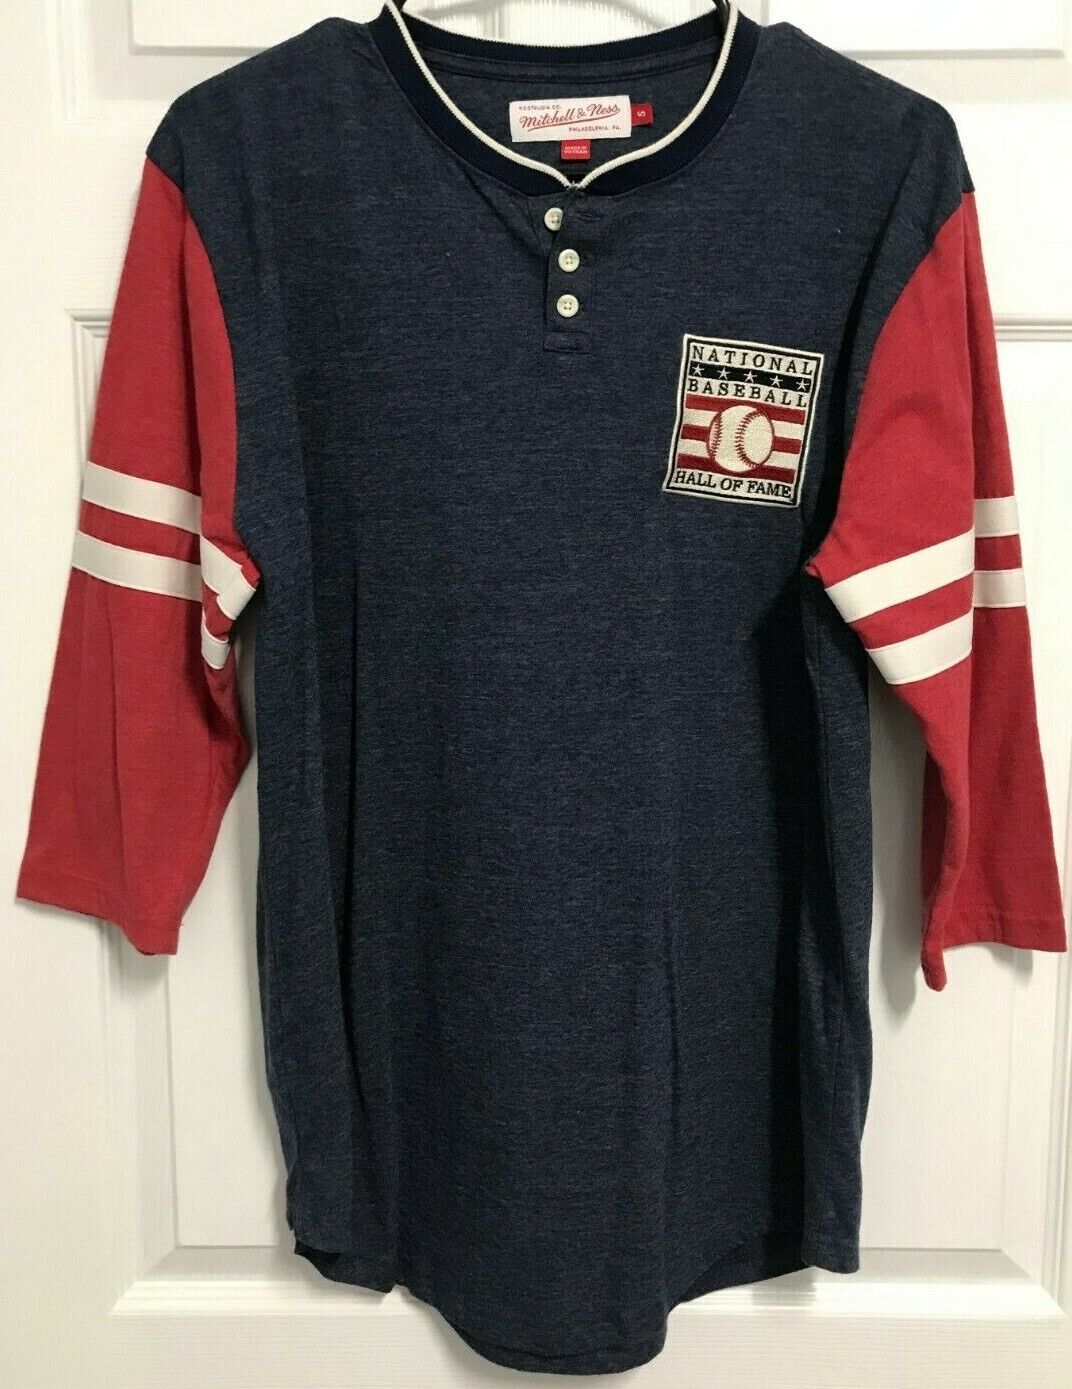 NATIONAL BASEBALL HALL OF FAME Adult 3/4 Sleeve Pullover Shirt S Mitchell Ness